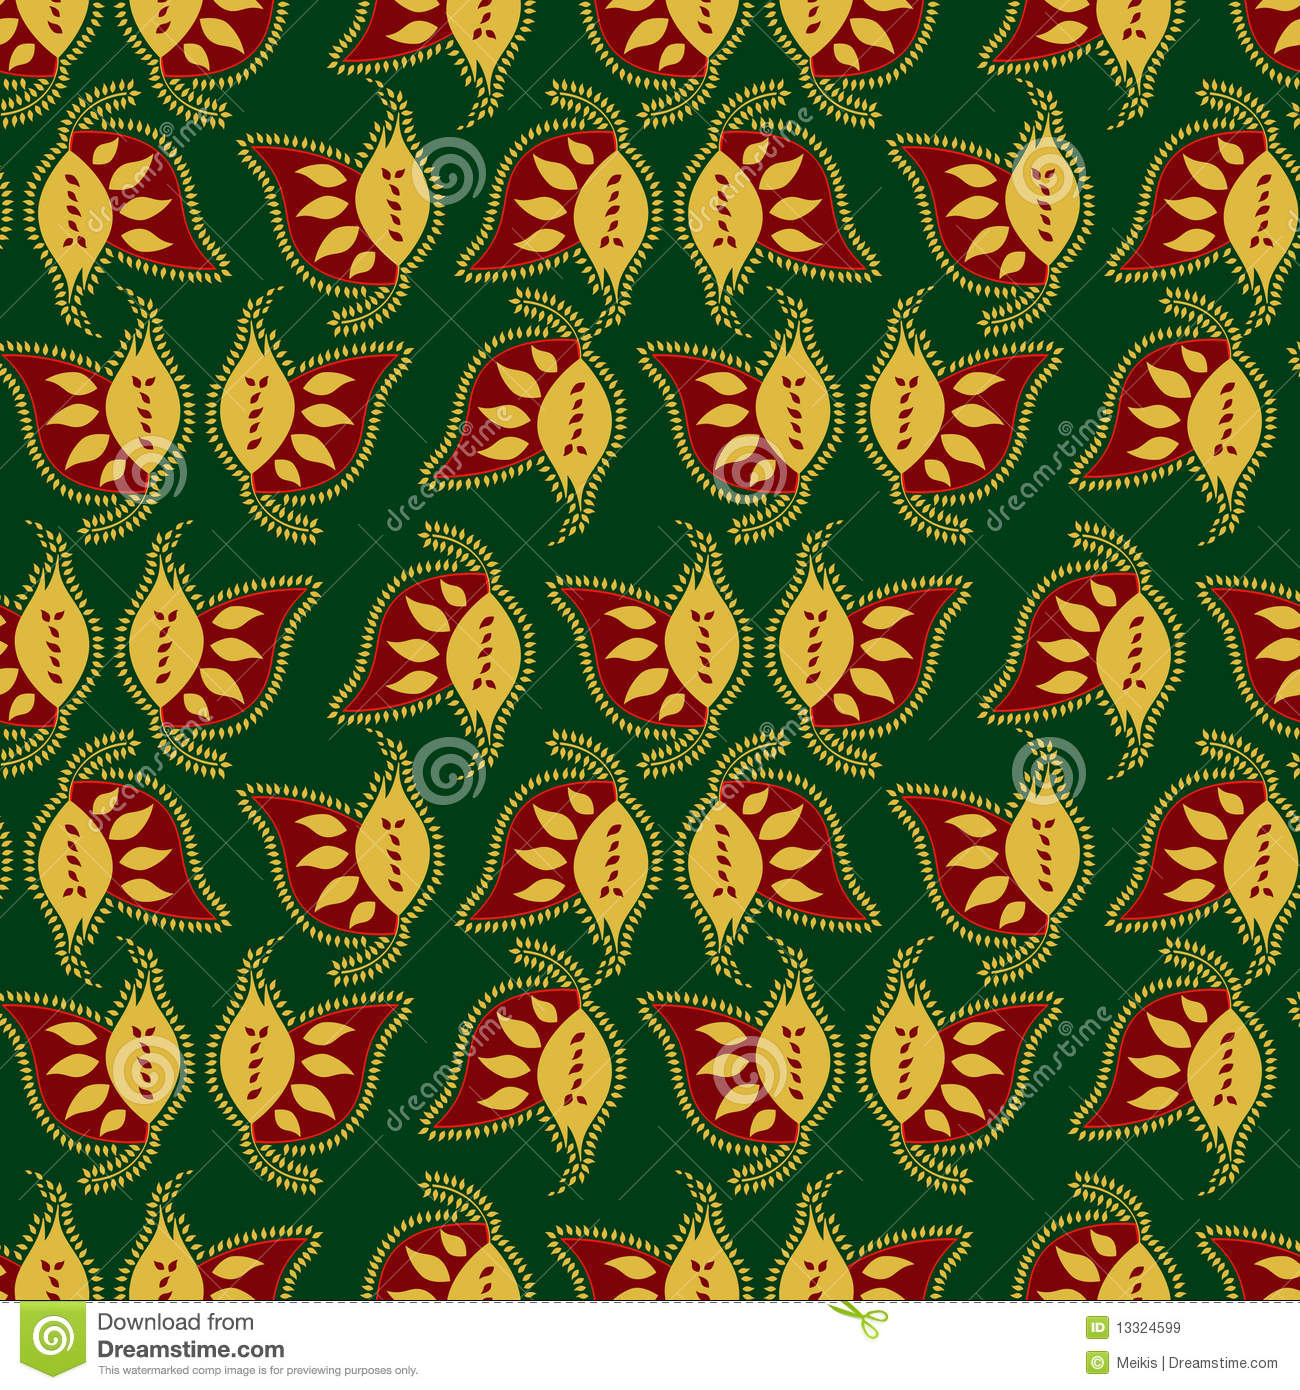 Related Indian Patterns Vector And Designs